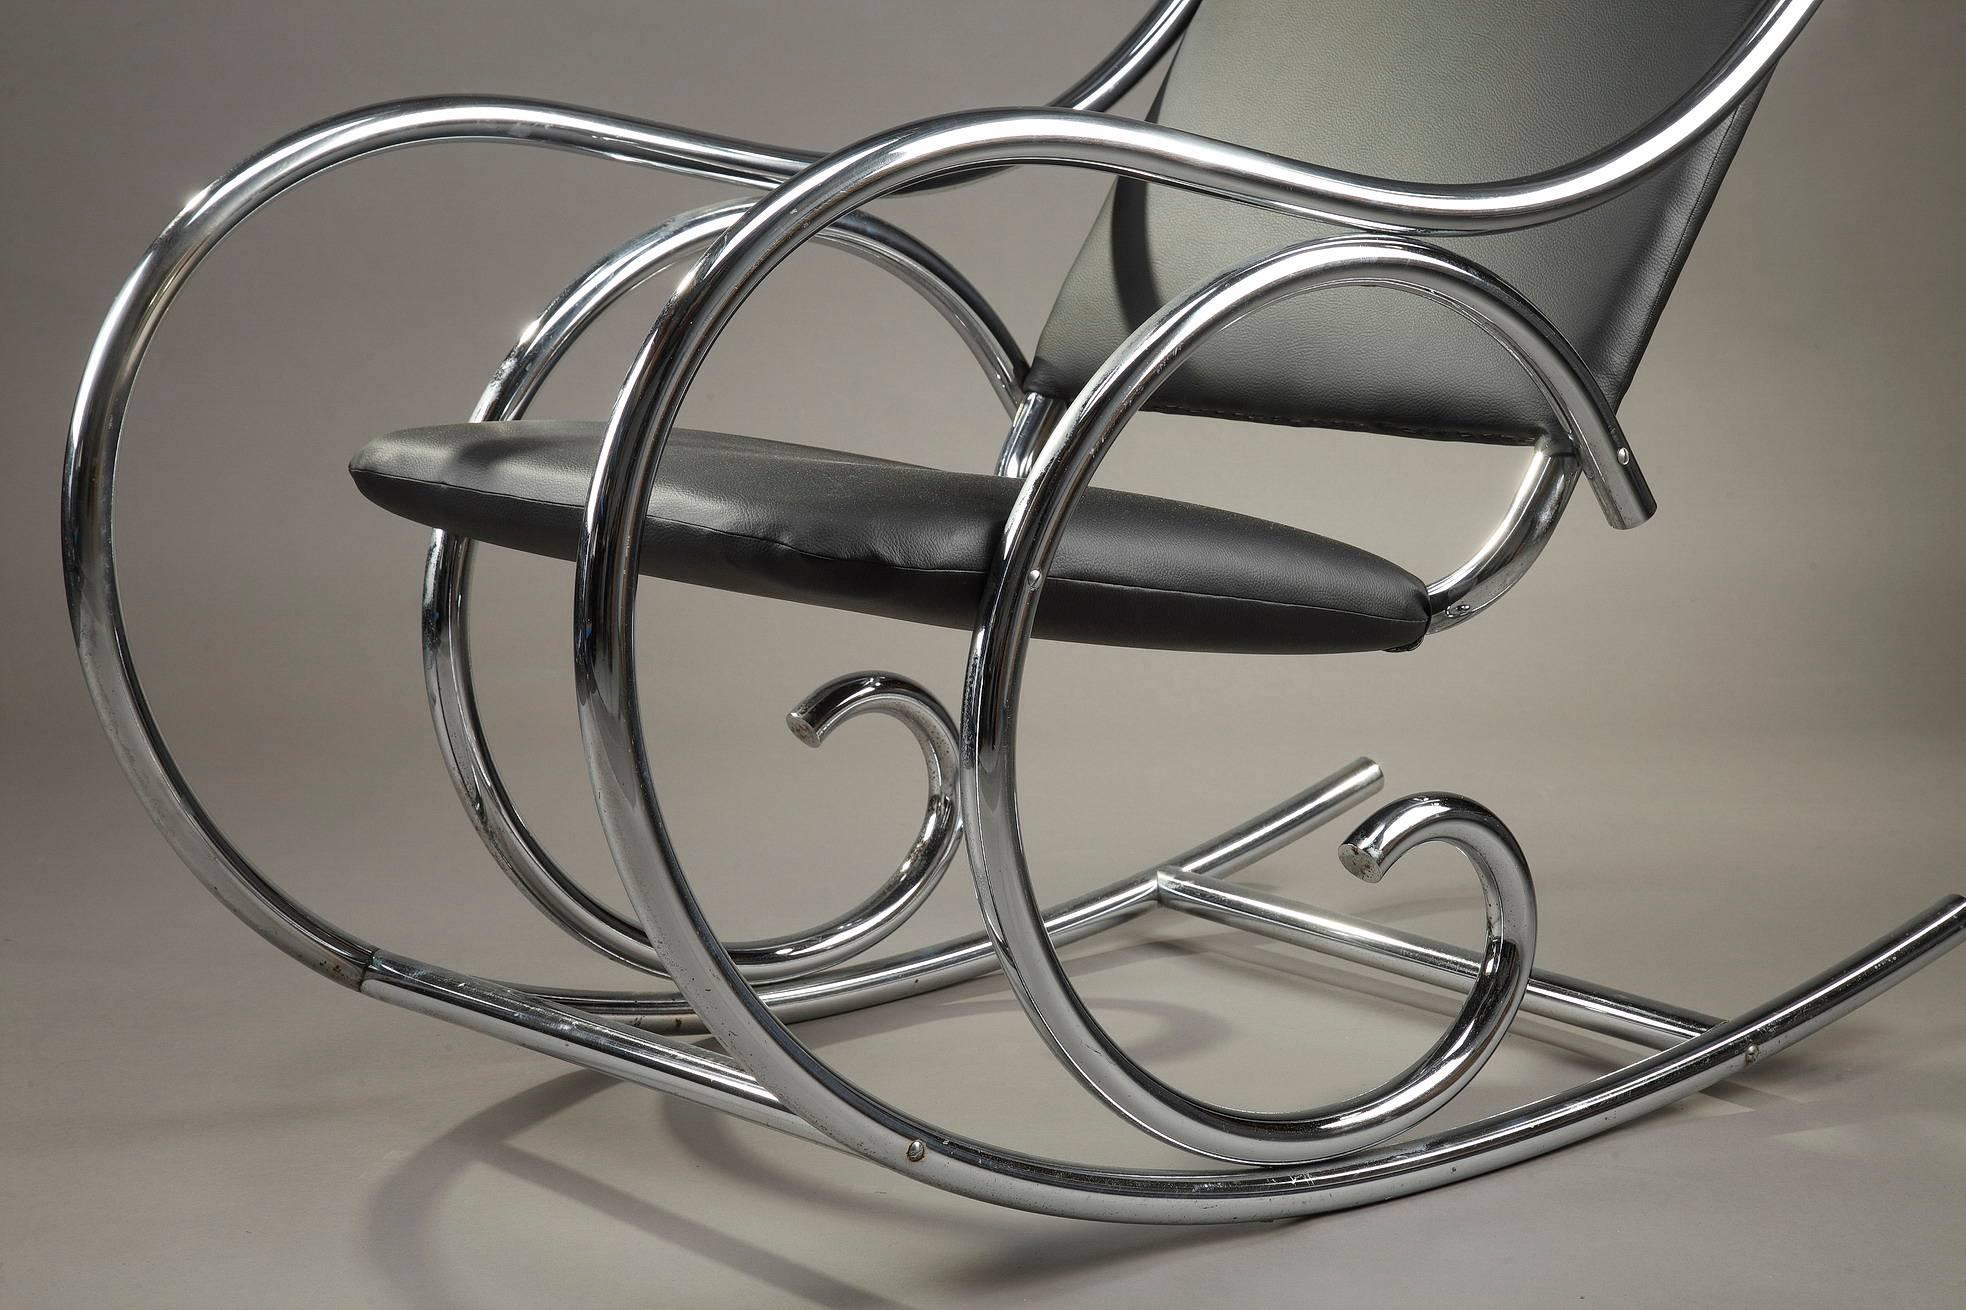 1950s rocking chair in Thonet style. It is composed of a black leatherette upholstered seat and back with oval top, above scrolling arms and undulating legs inspired by the Art Nouveau style. 

Michaël Thonet began, circa 1830 to experiment with